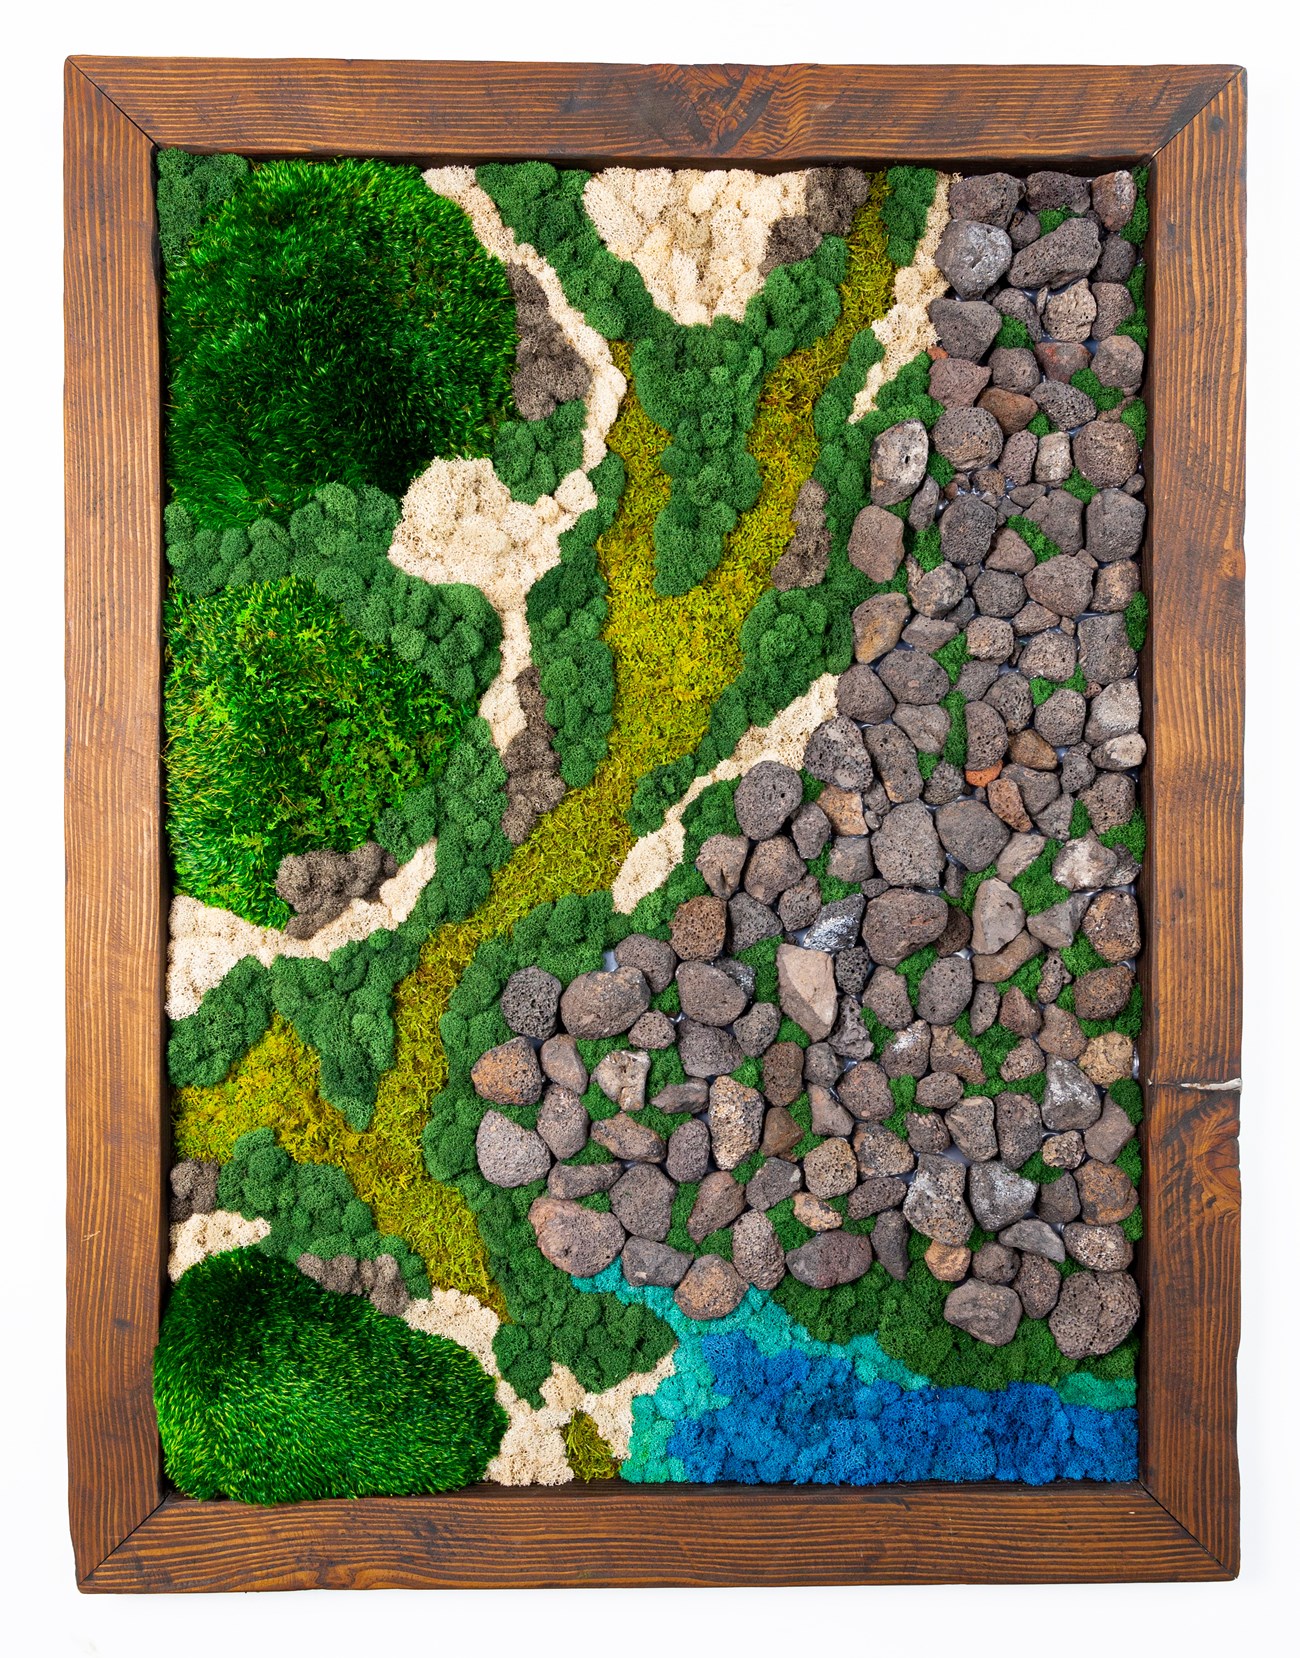 A large wood frame borders a moss wall in which rocks and moss of different colors are arranged to depict a landscape.